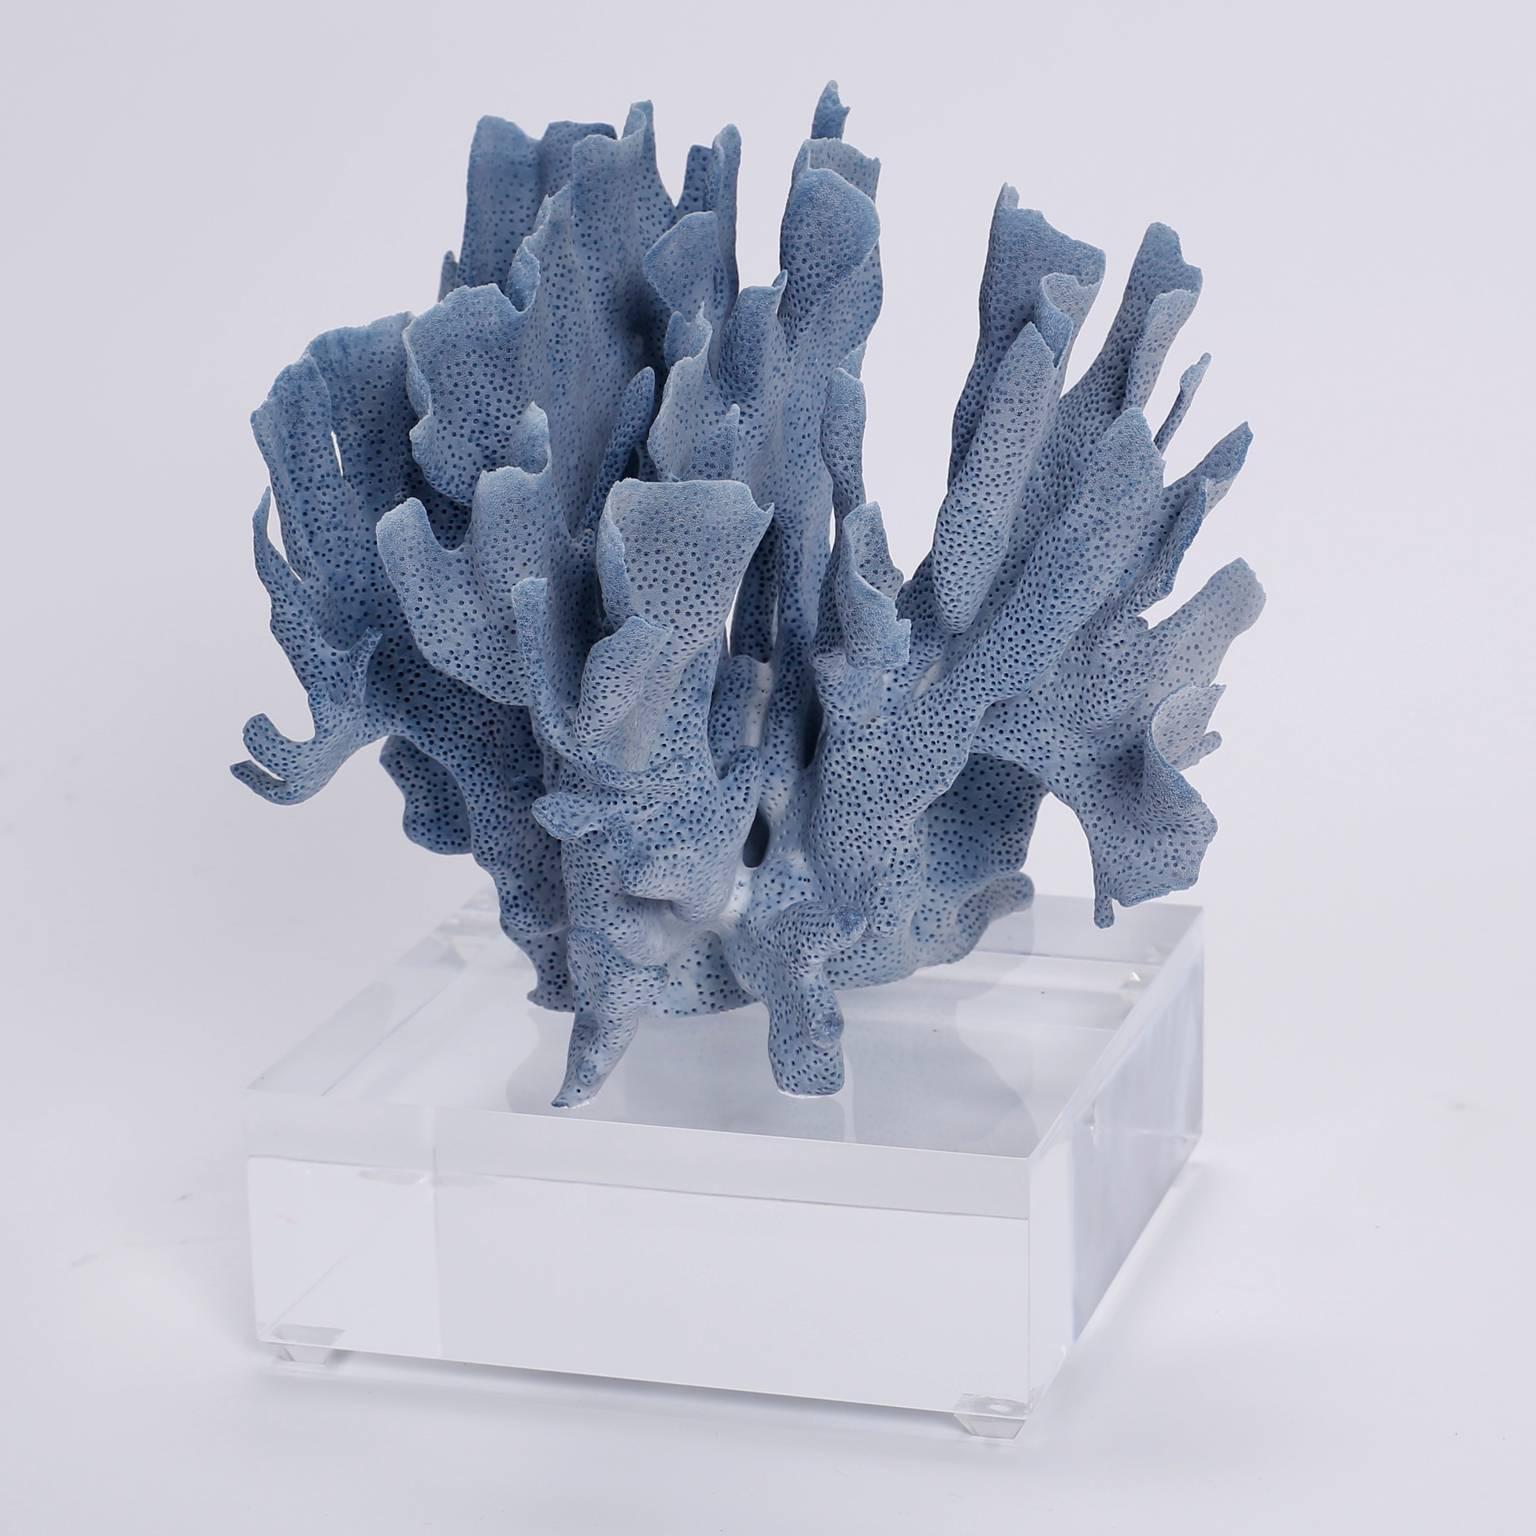 Solomon Islands Blue Coral Sculptures on Lucite, Priced Individually